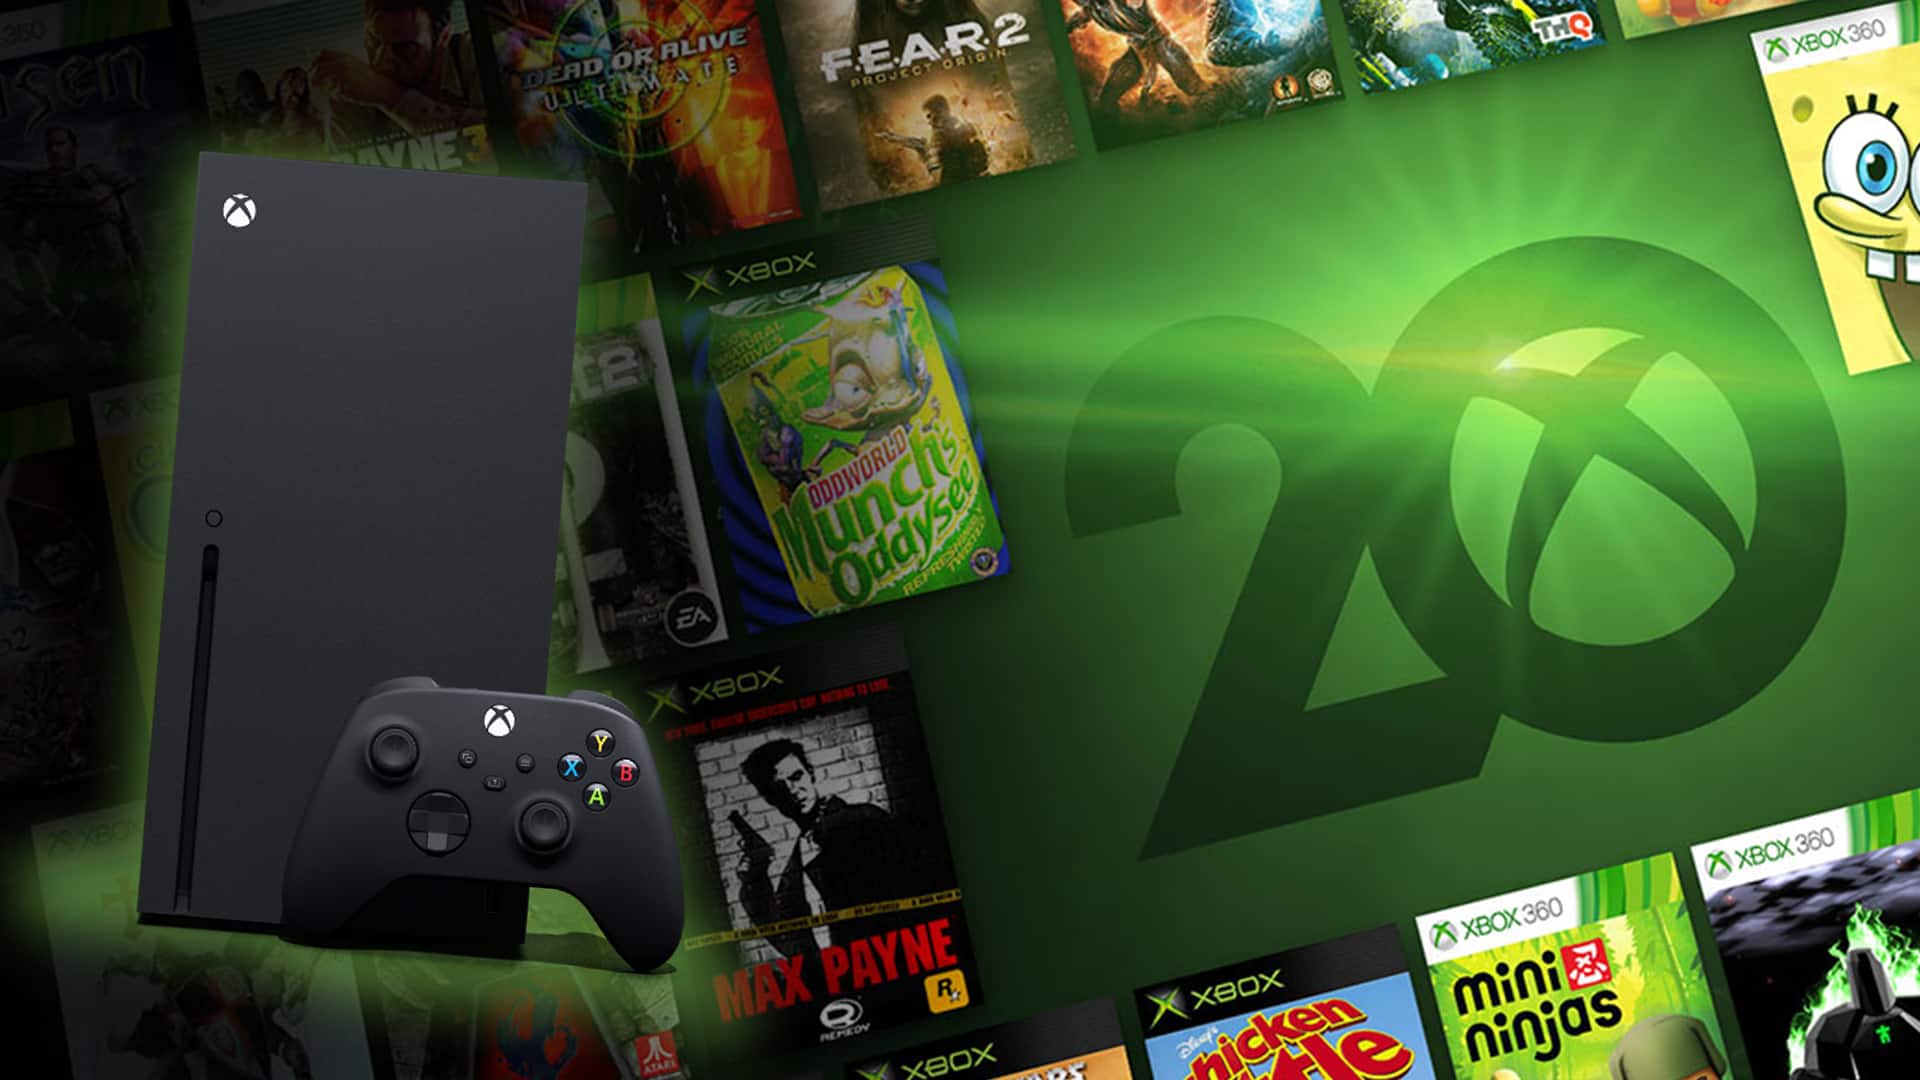 Xbox One: backwards compatibility prank breaks consoles, Games